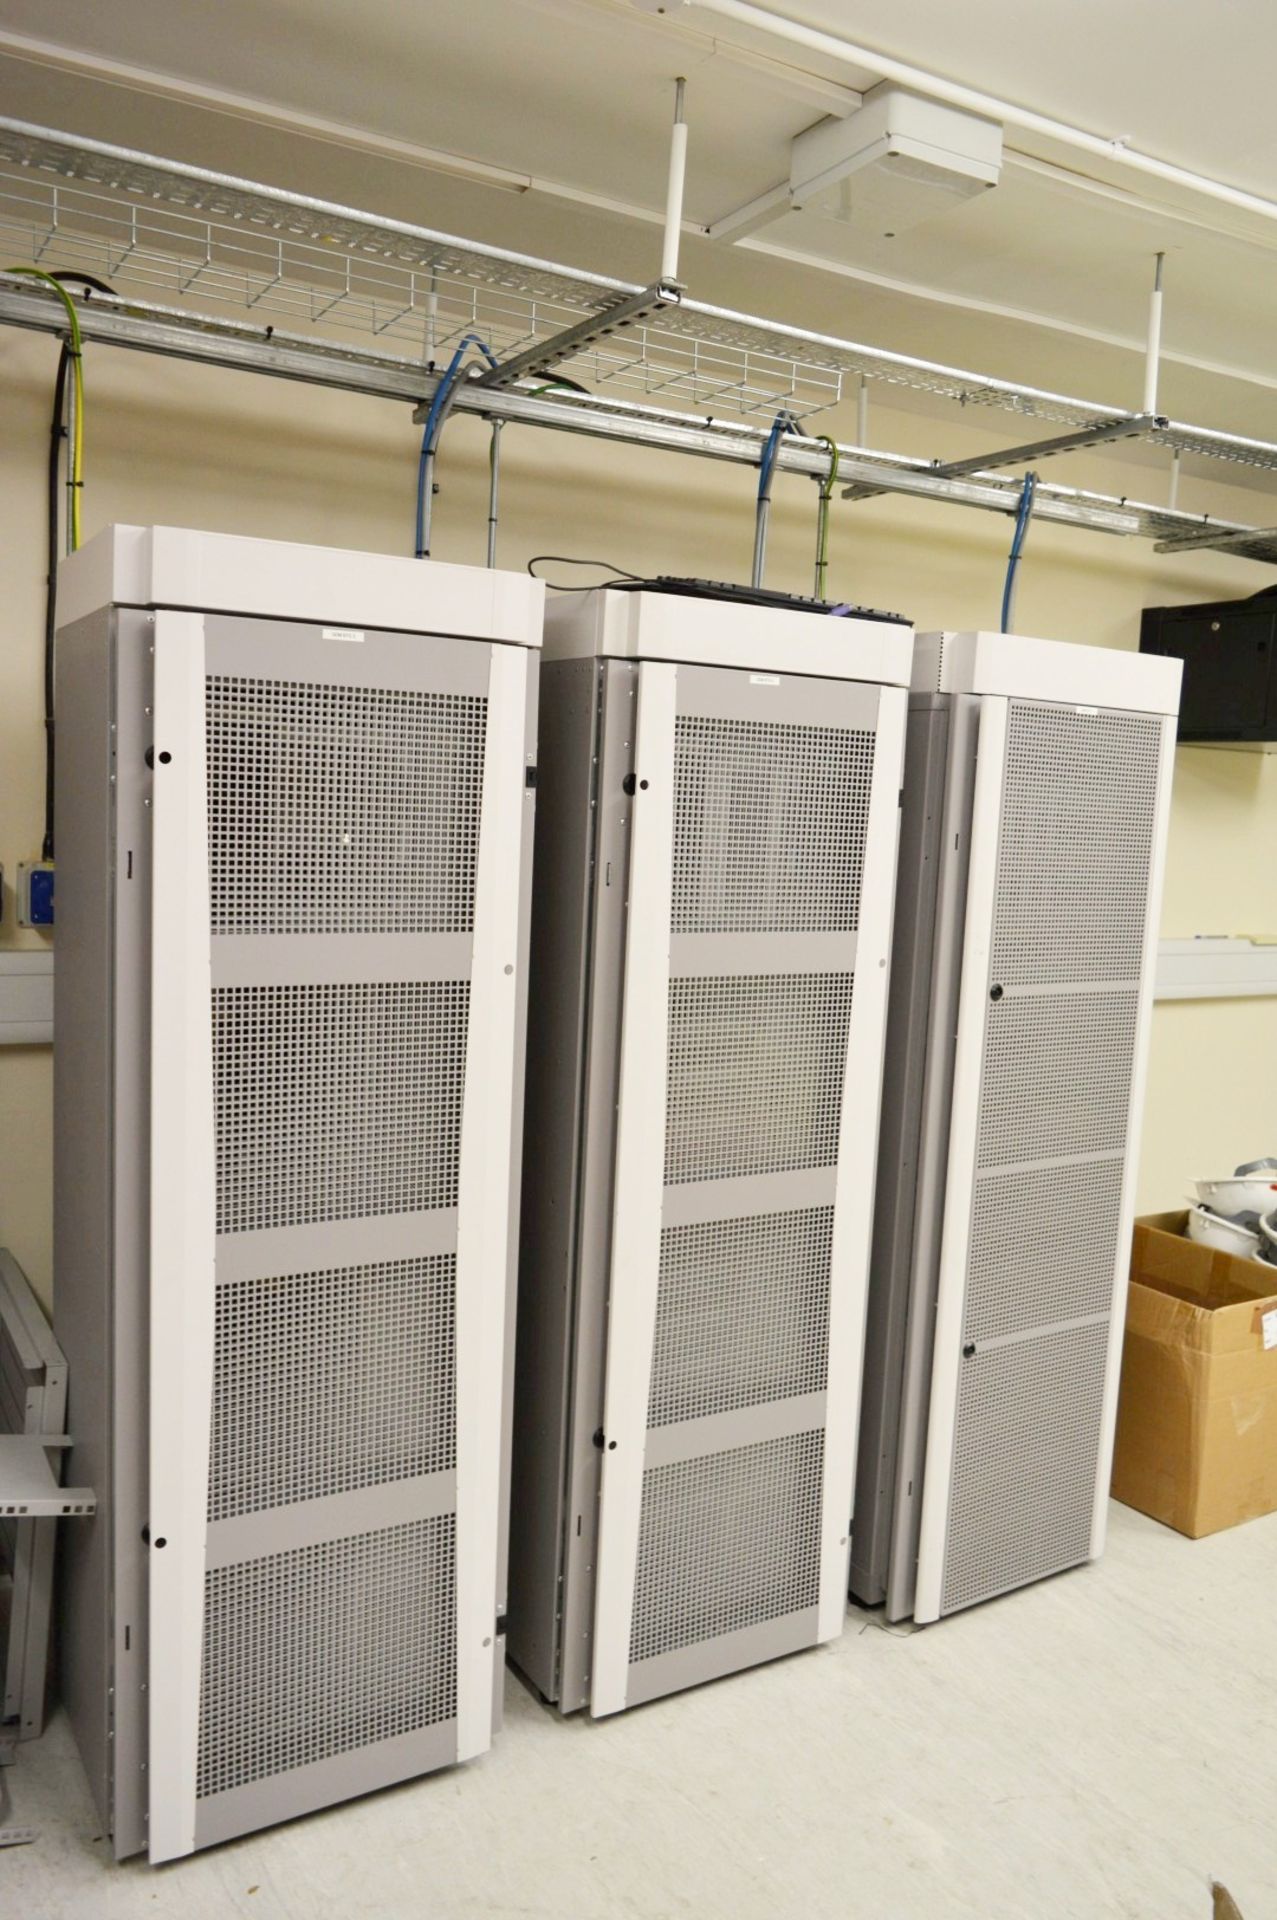 1 x Selection of Nokia Siemens Test Room Equipment Including Loaded Nokia Ultrasite WCDMA Supreme - Image 65 of 72